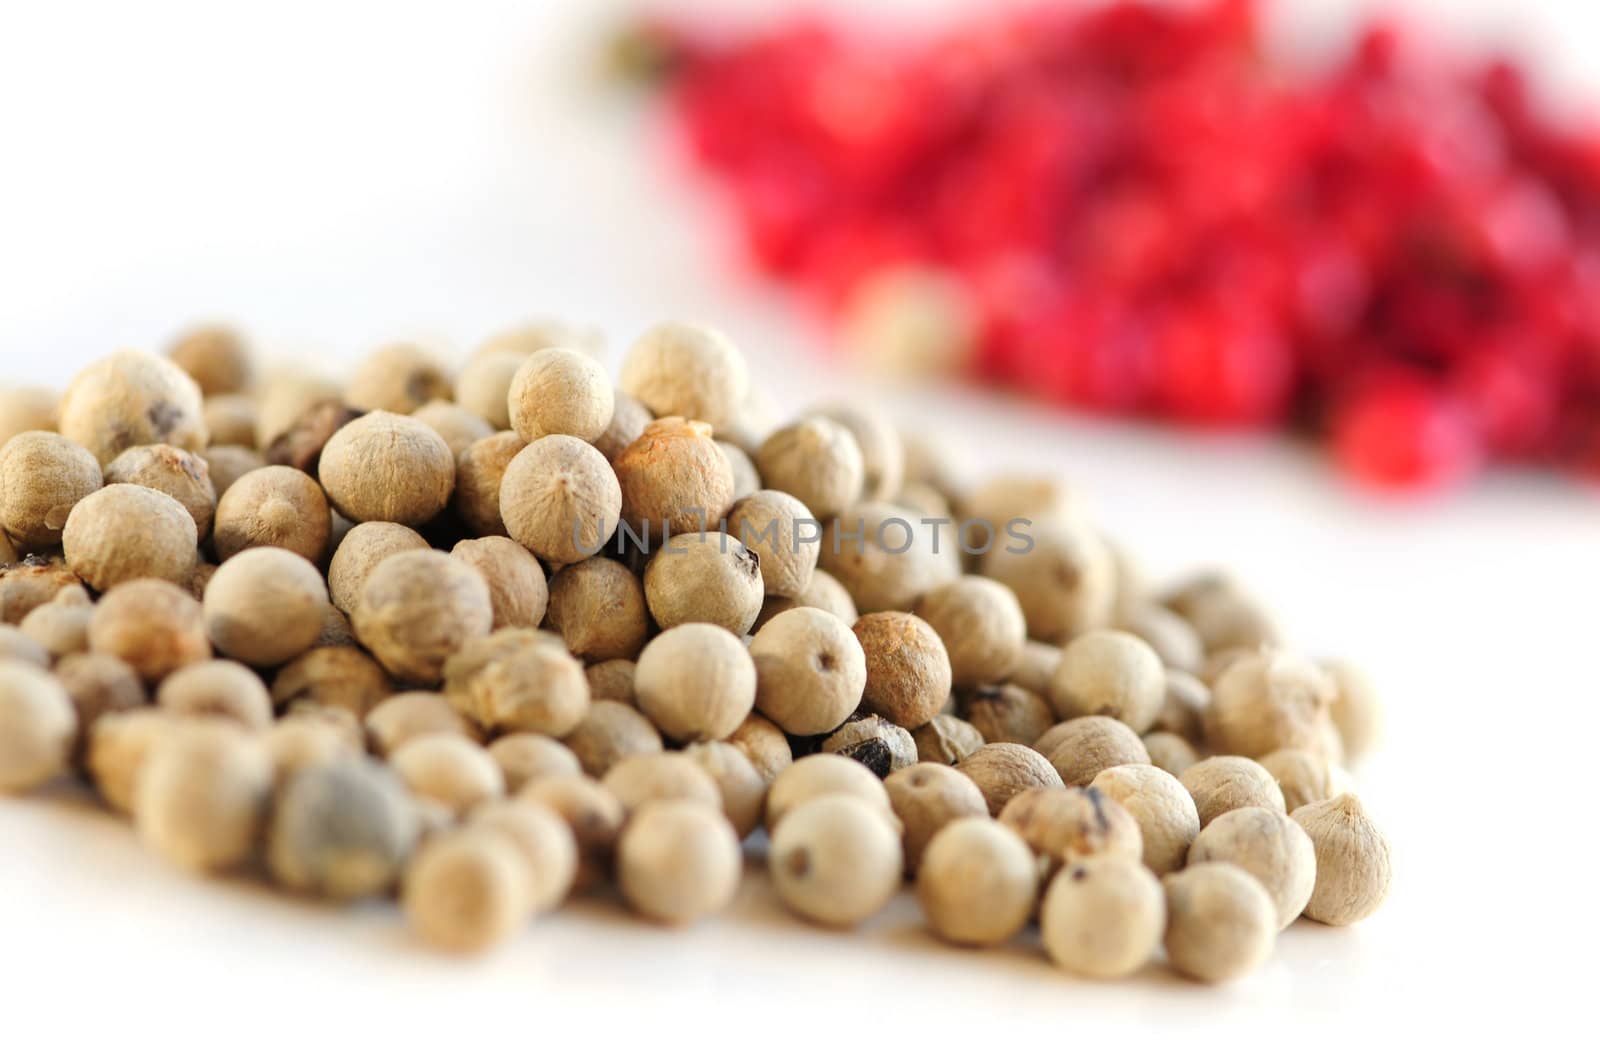 Heaps of white and red peppercorns on white background